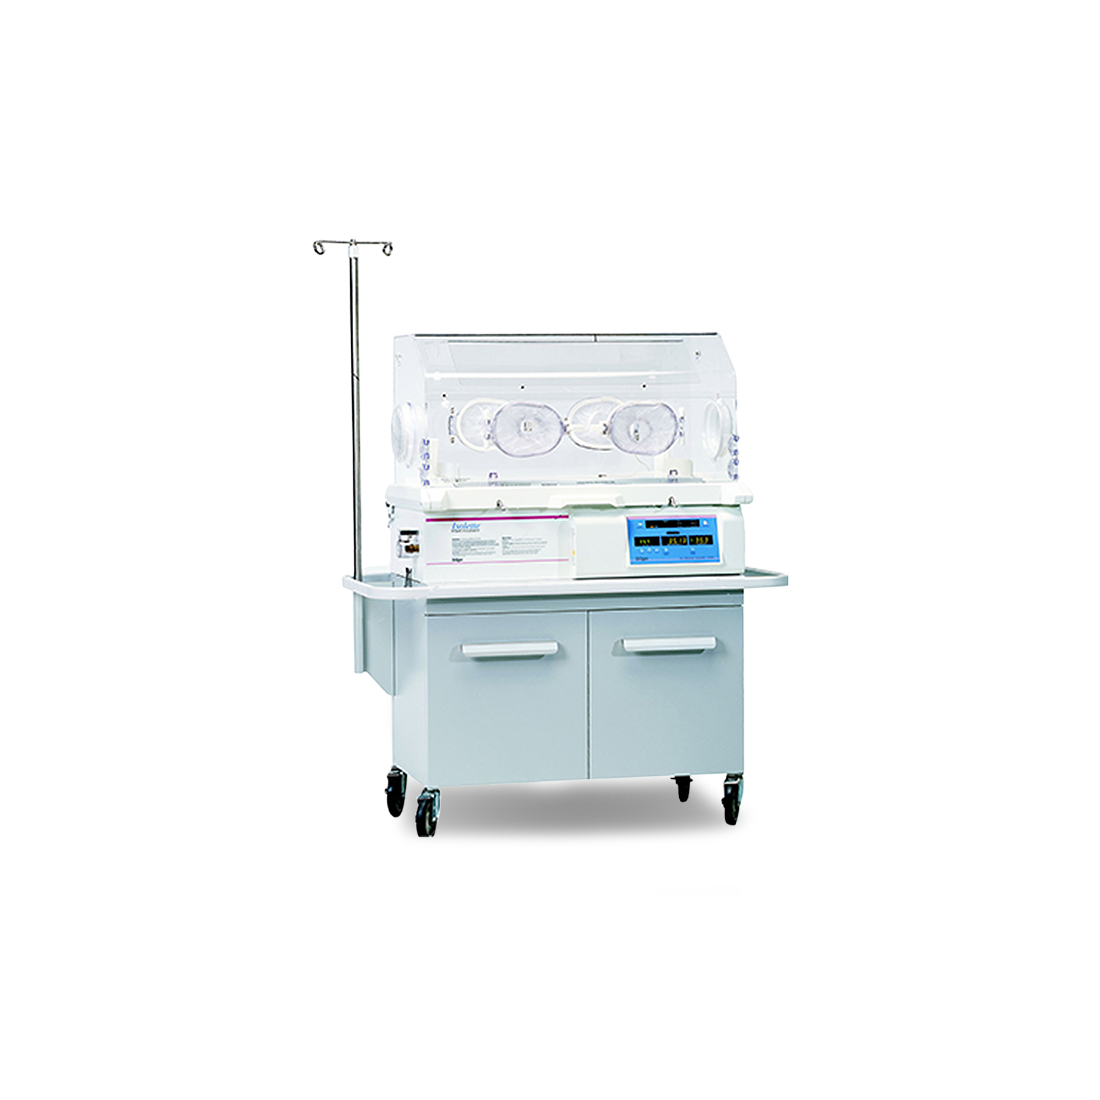 Drager Air Shields C450 Infant Incubator